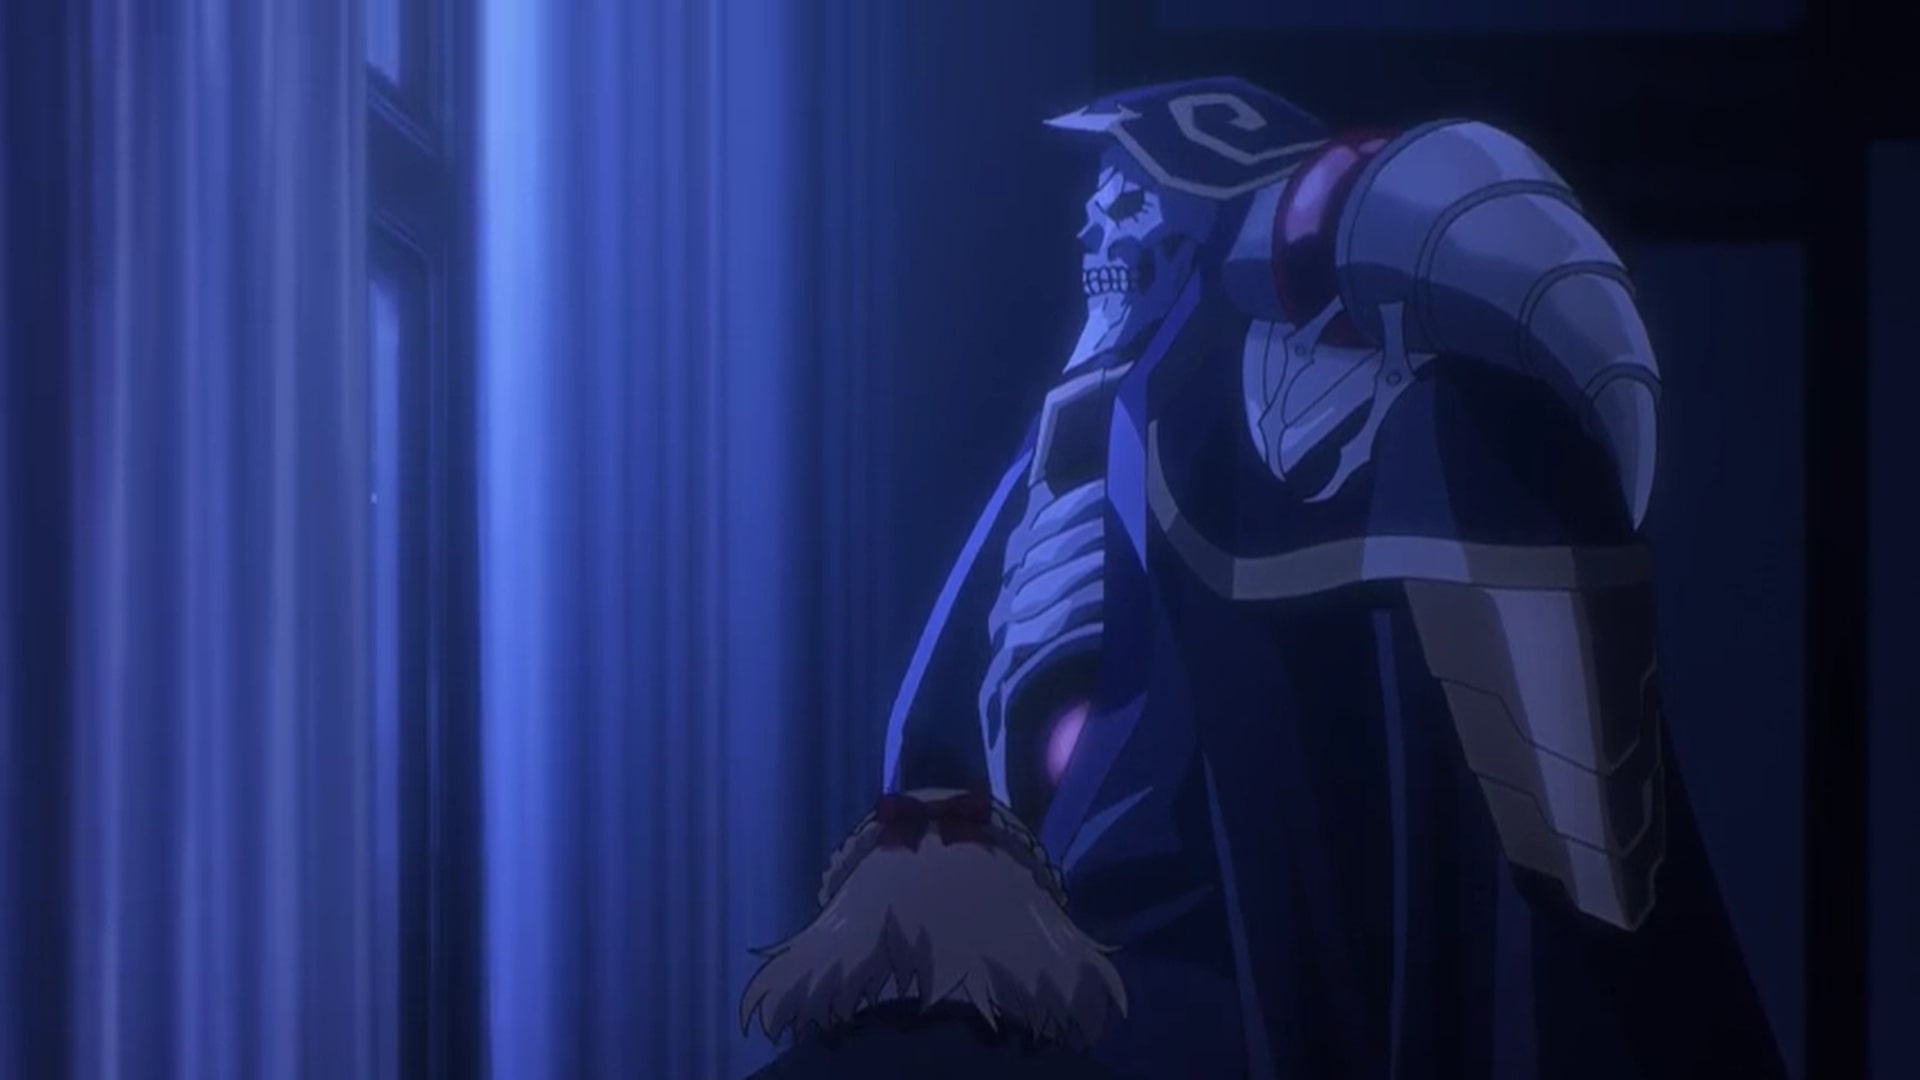 Overlord Season 4 Episode 2 Recap and Ending, Explained